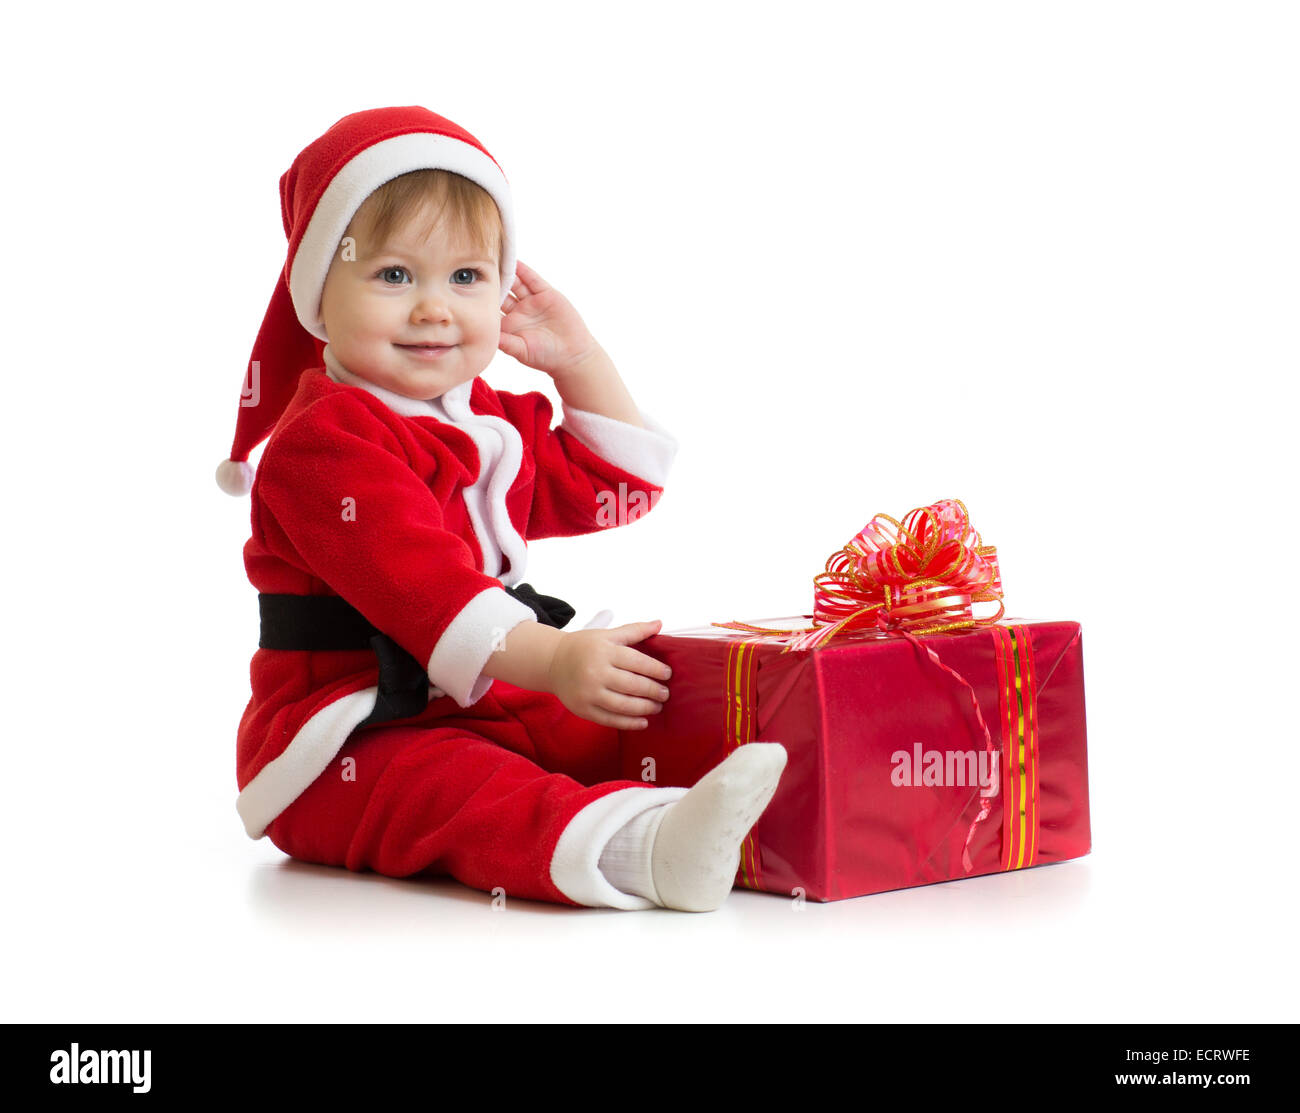 Christmas baby with box in Santa's clothes isolated on white Stock Photo